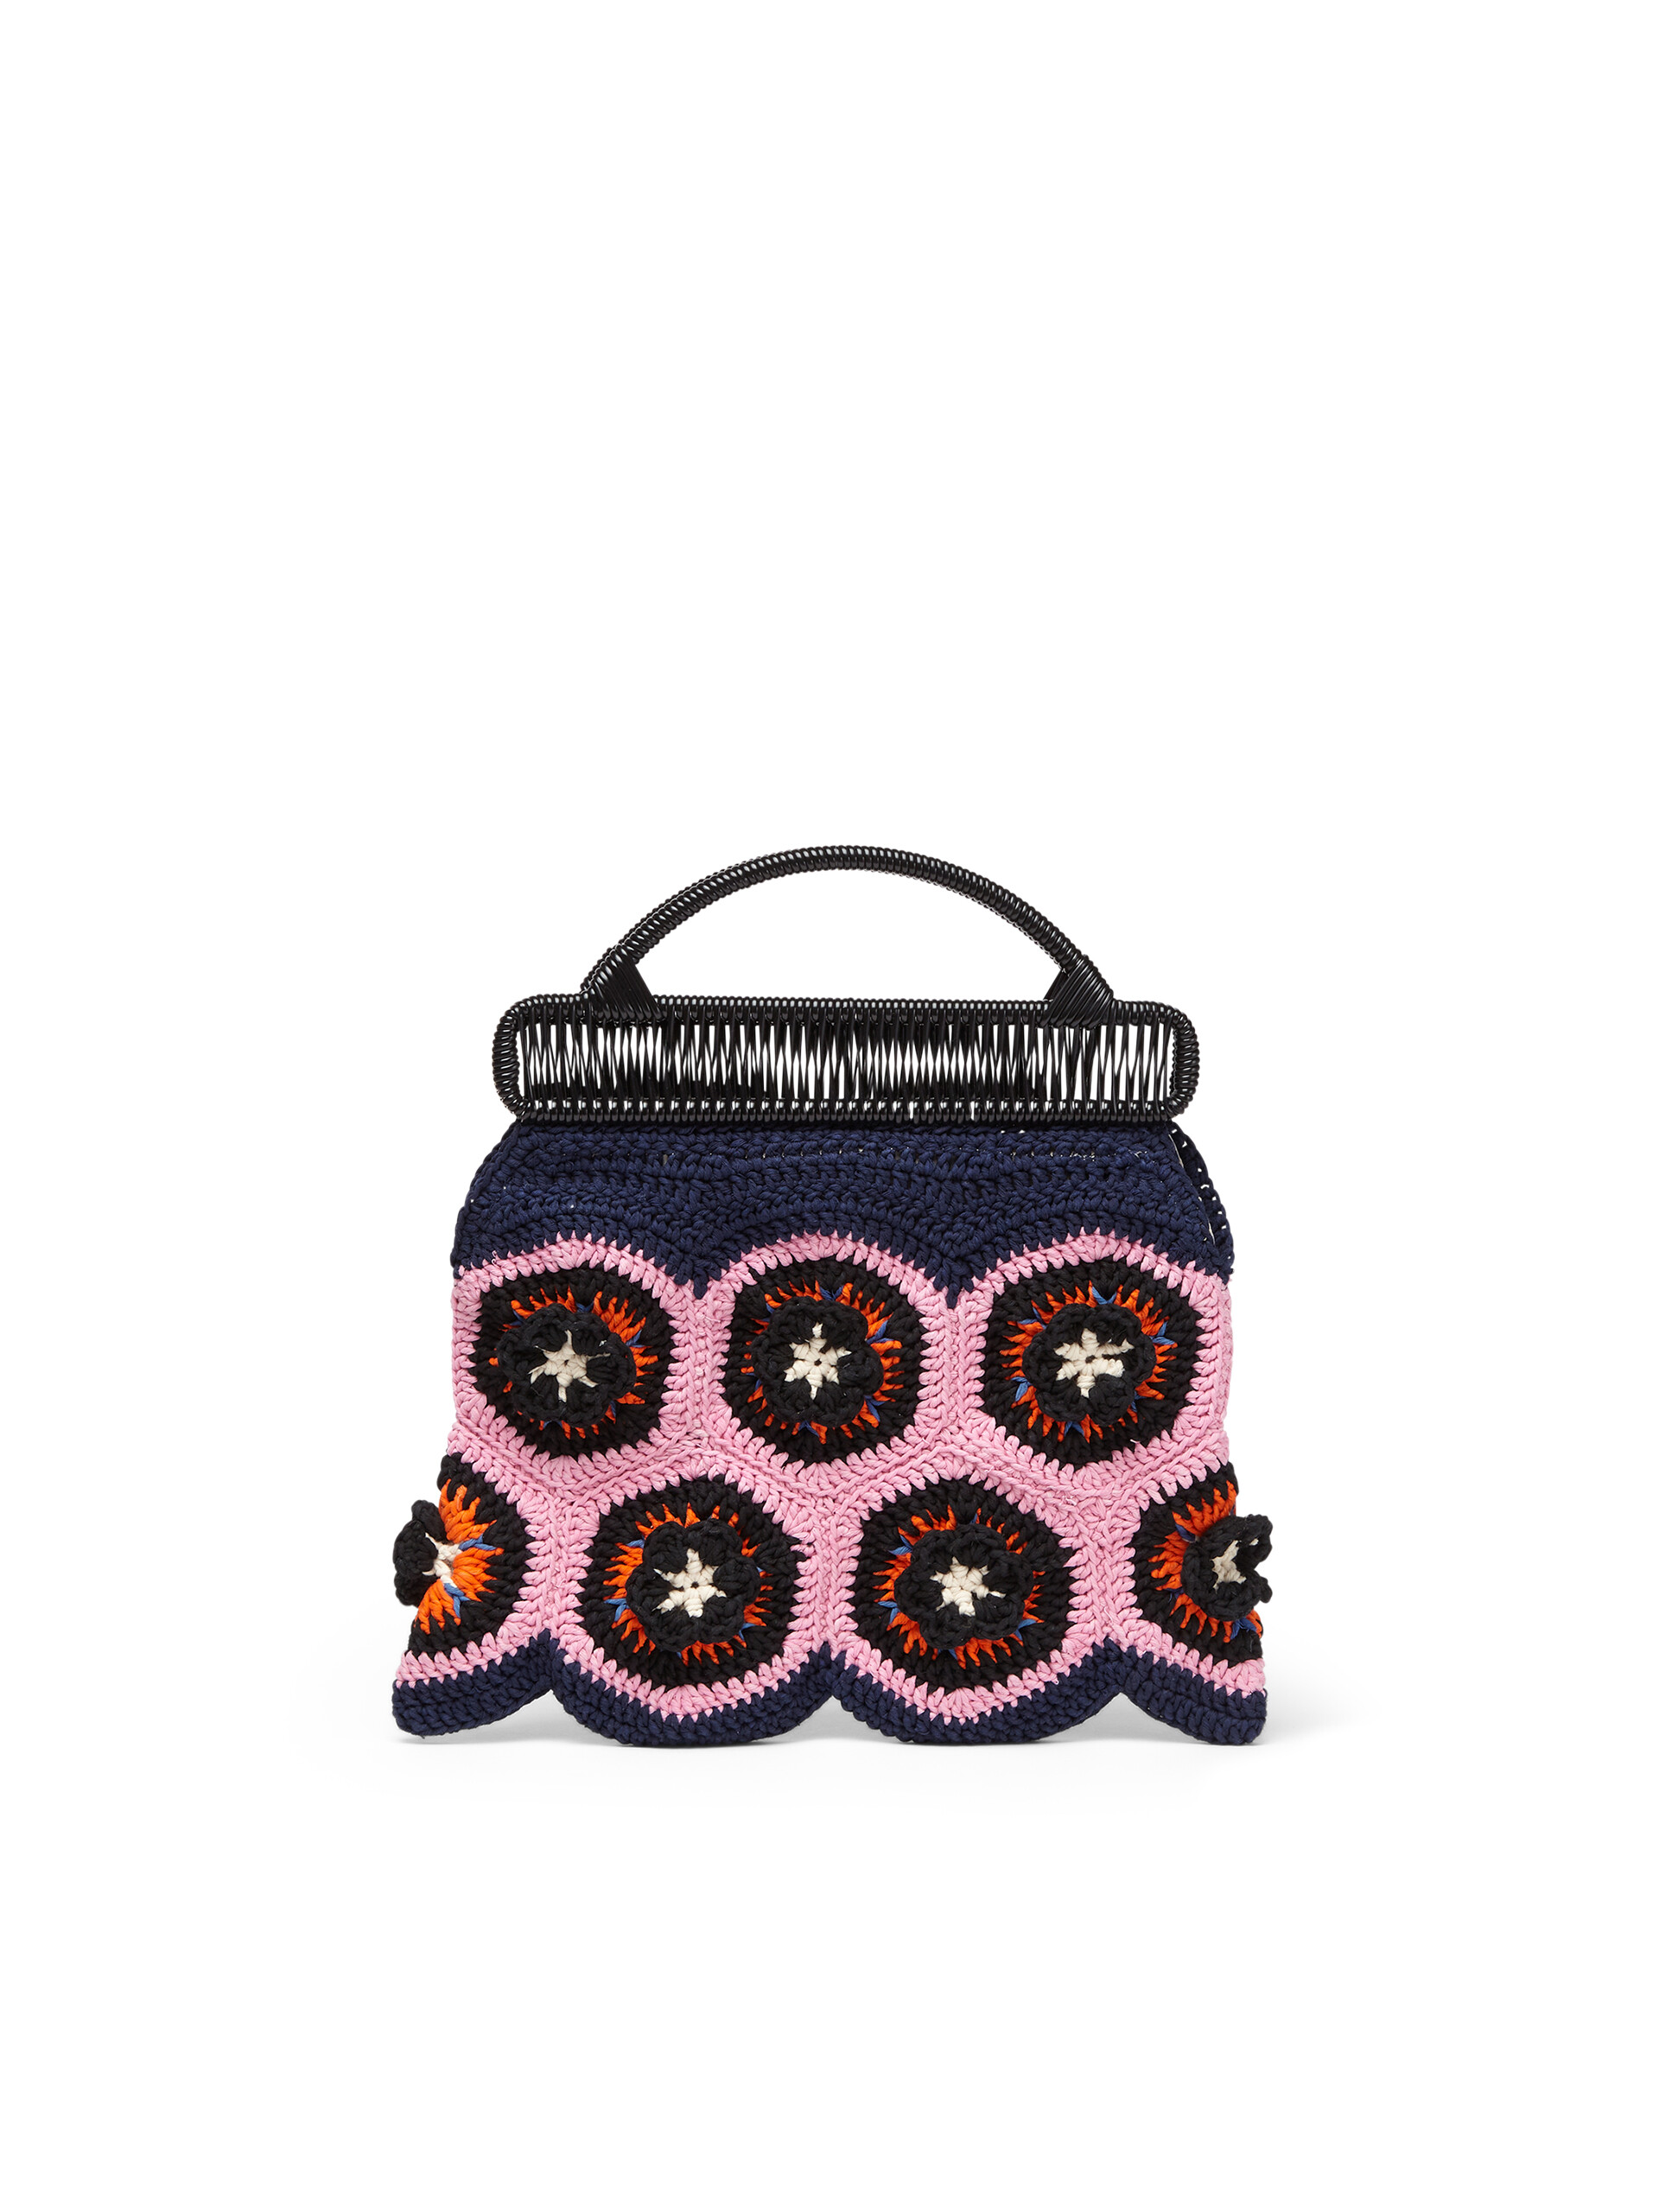 MARNI MARKET bag in pink and blue crochet cotton - Bags - Image 3